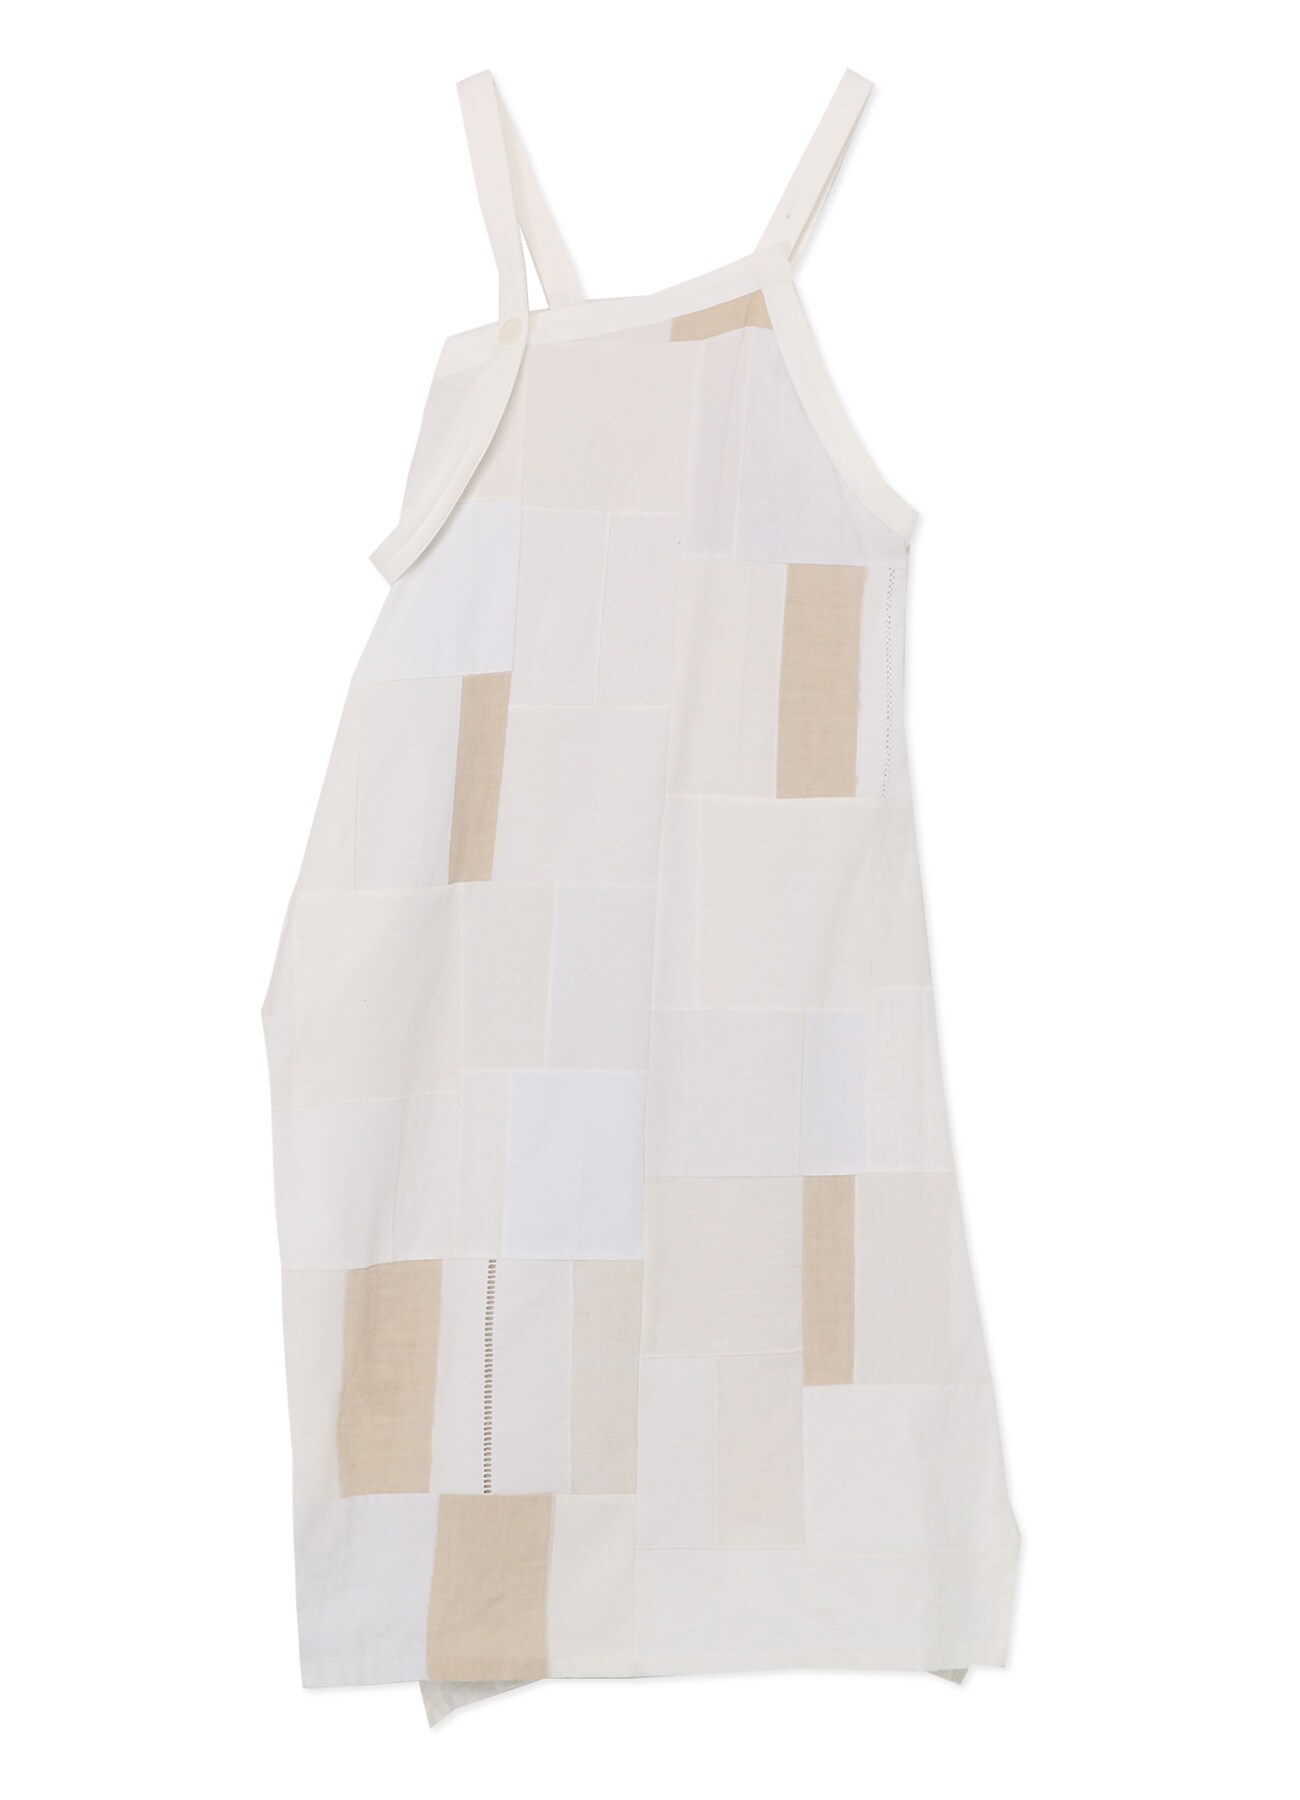 [Y’s KHADI COLLECTION]PATCHWORK SLEEVELESS DRESS